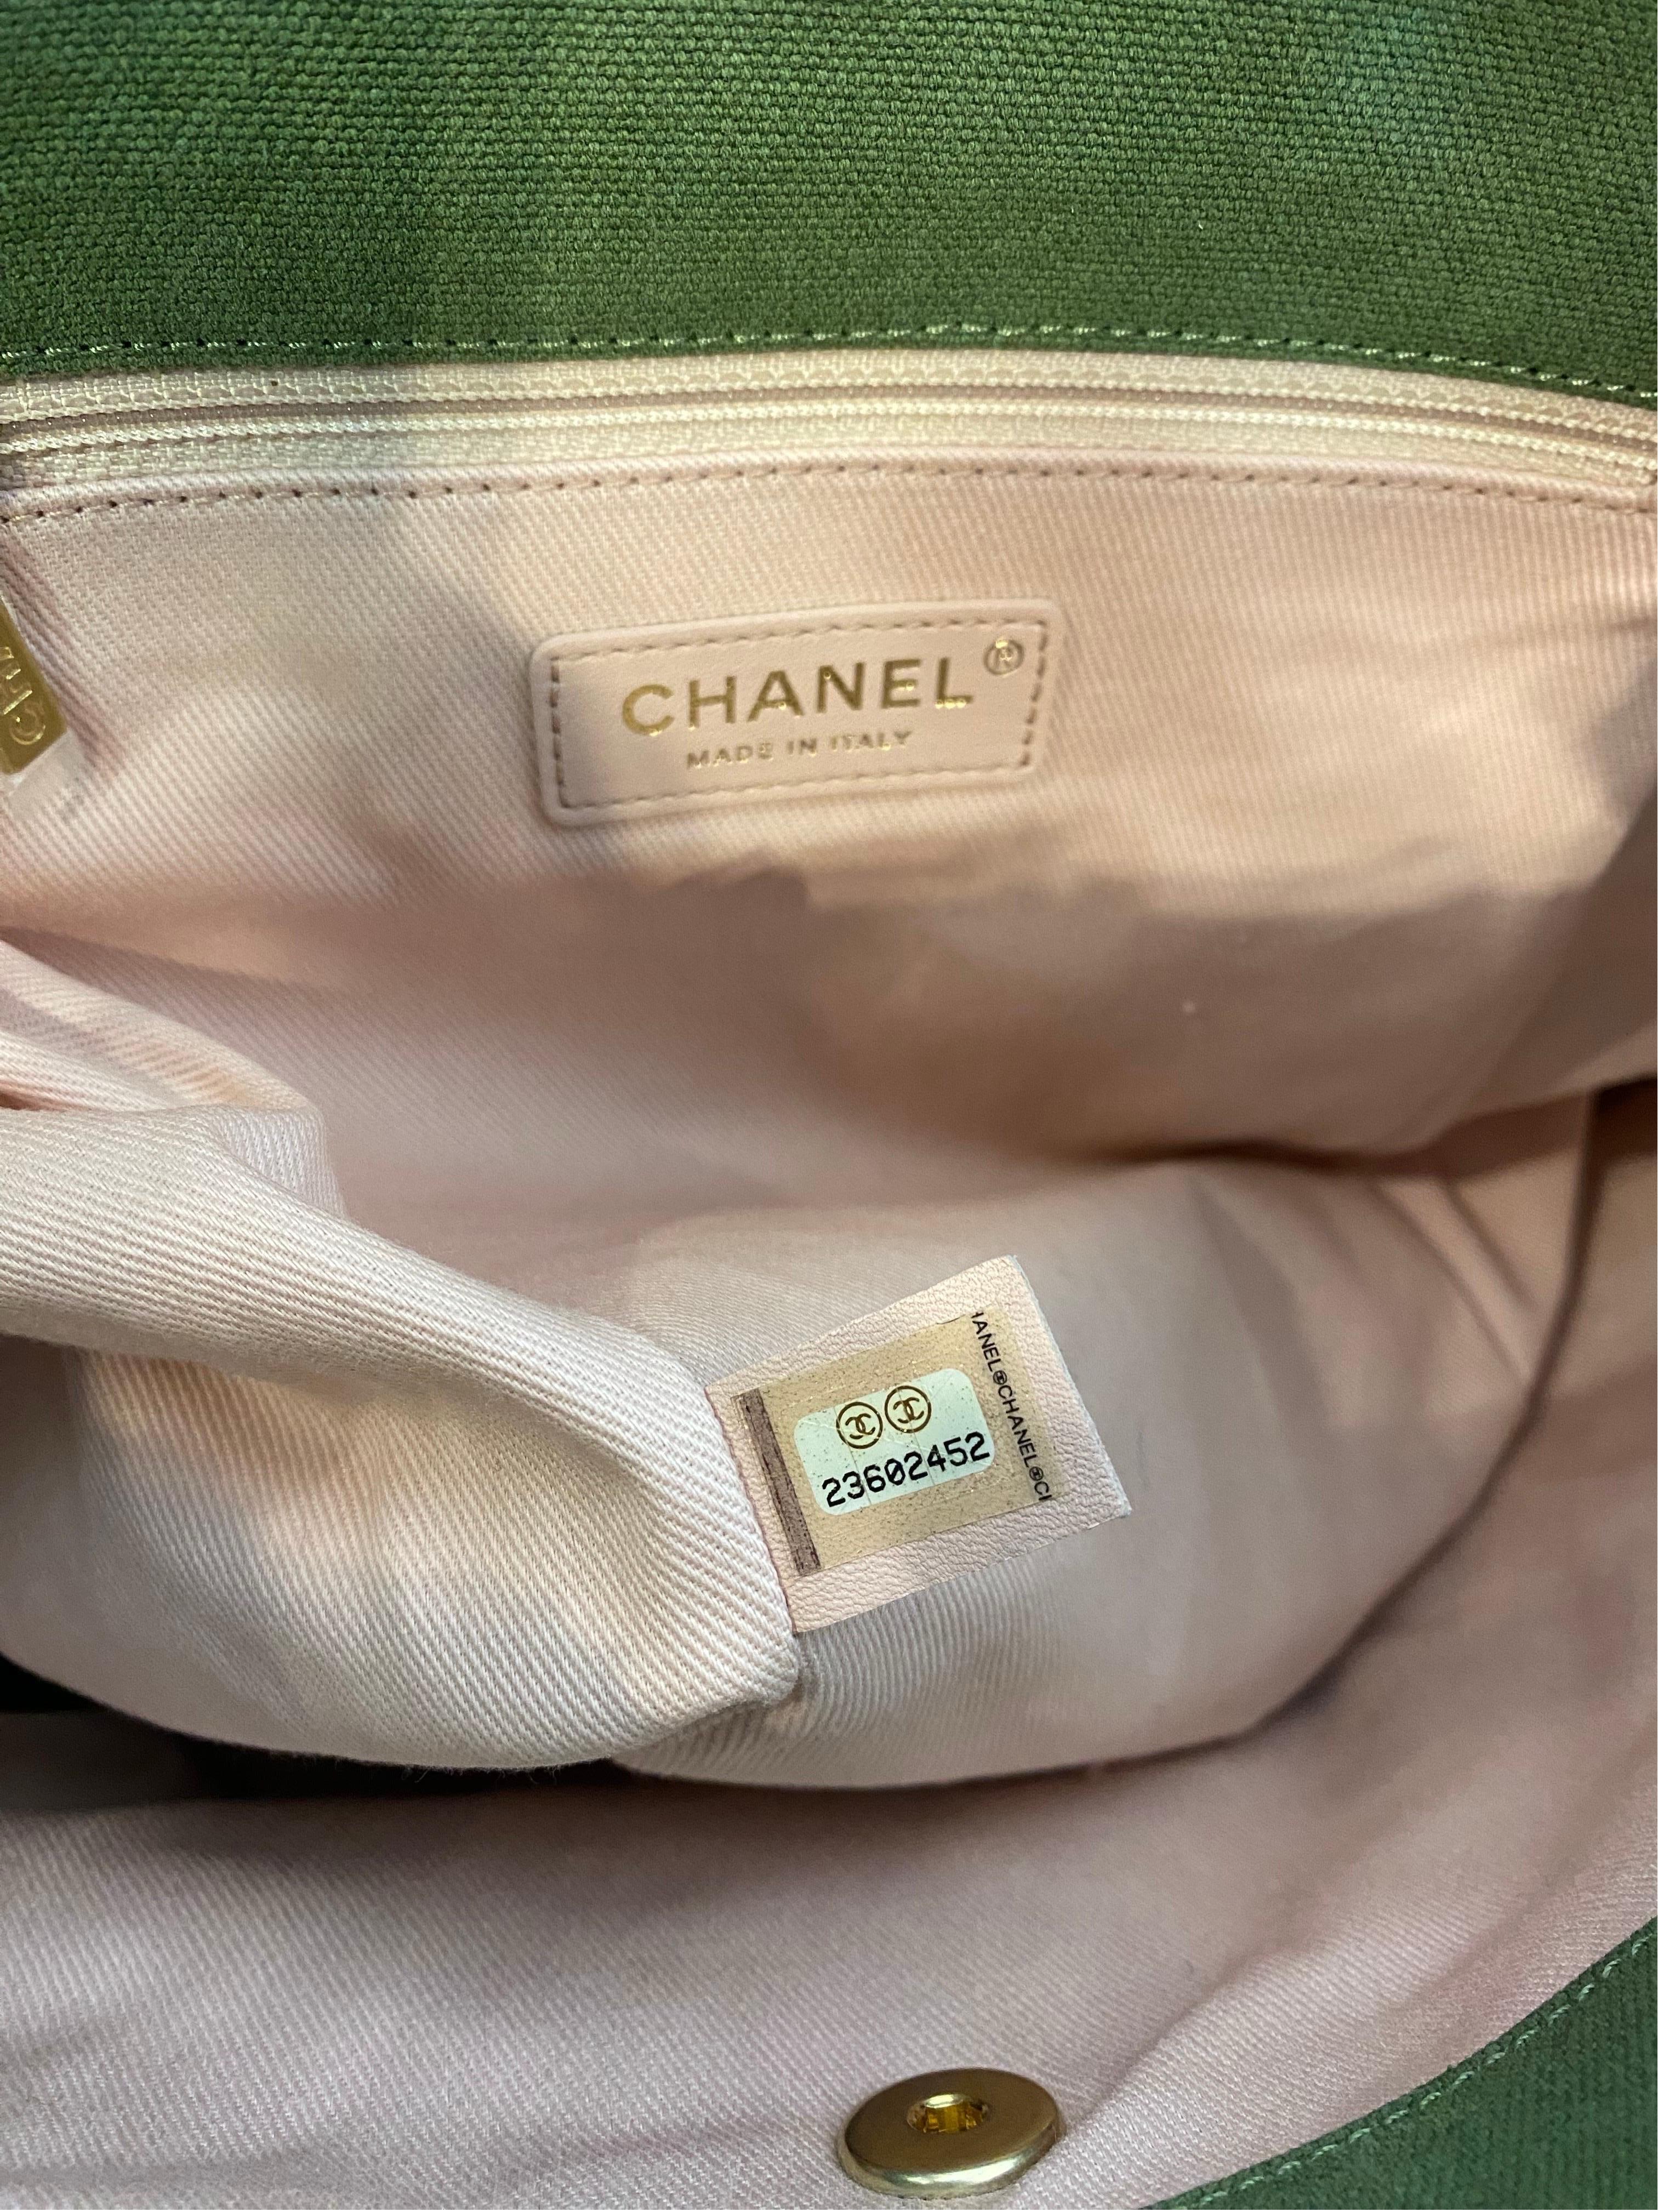 Chanel Cruise 2017 green Cuba Backpack For Sale 5